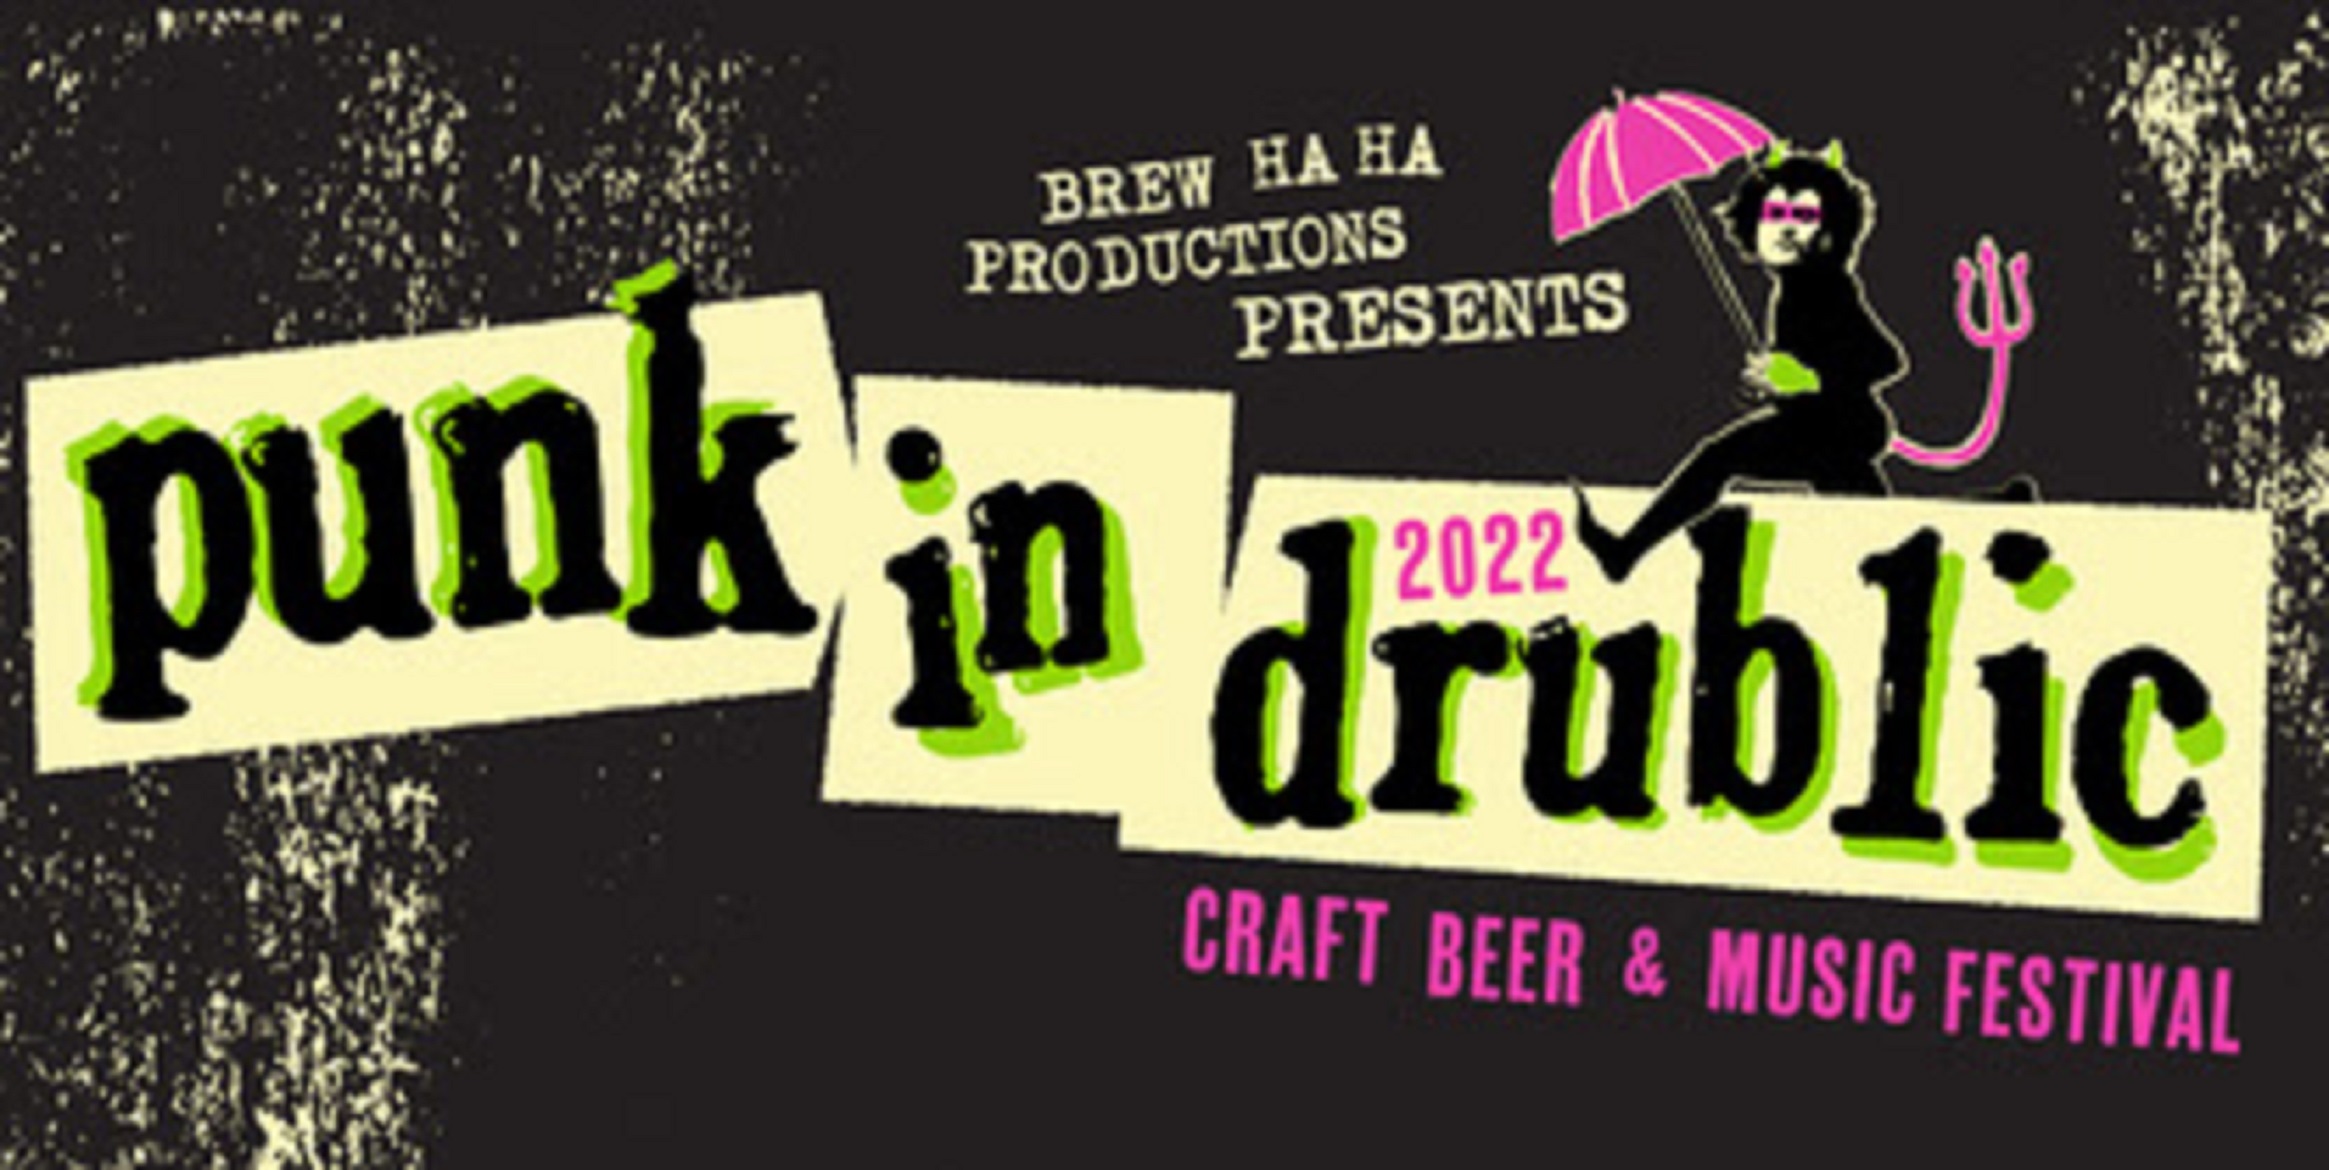 Punk In Drublic Craft Beer & Music Festival Spring Events Announced